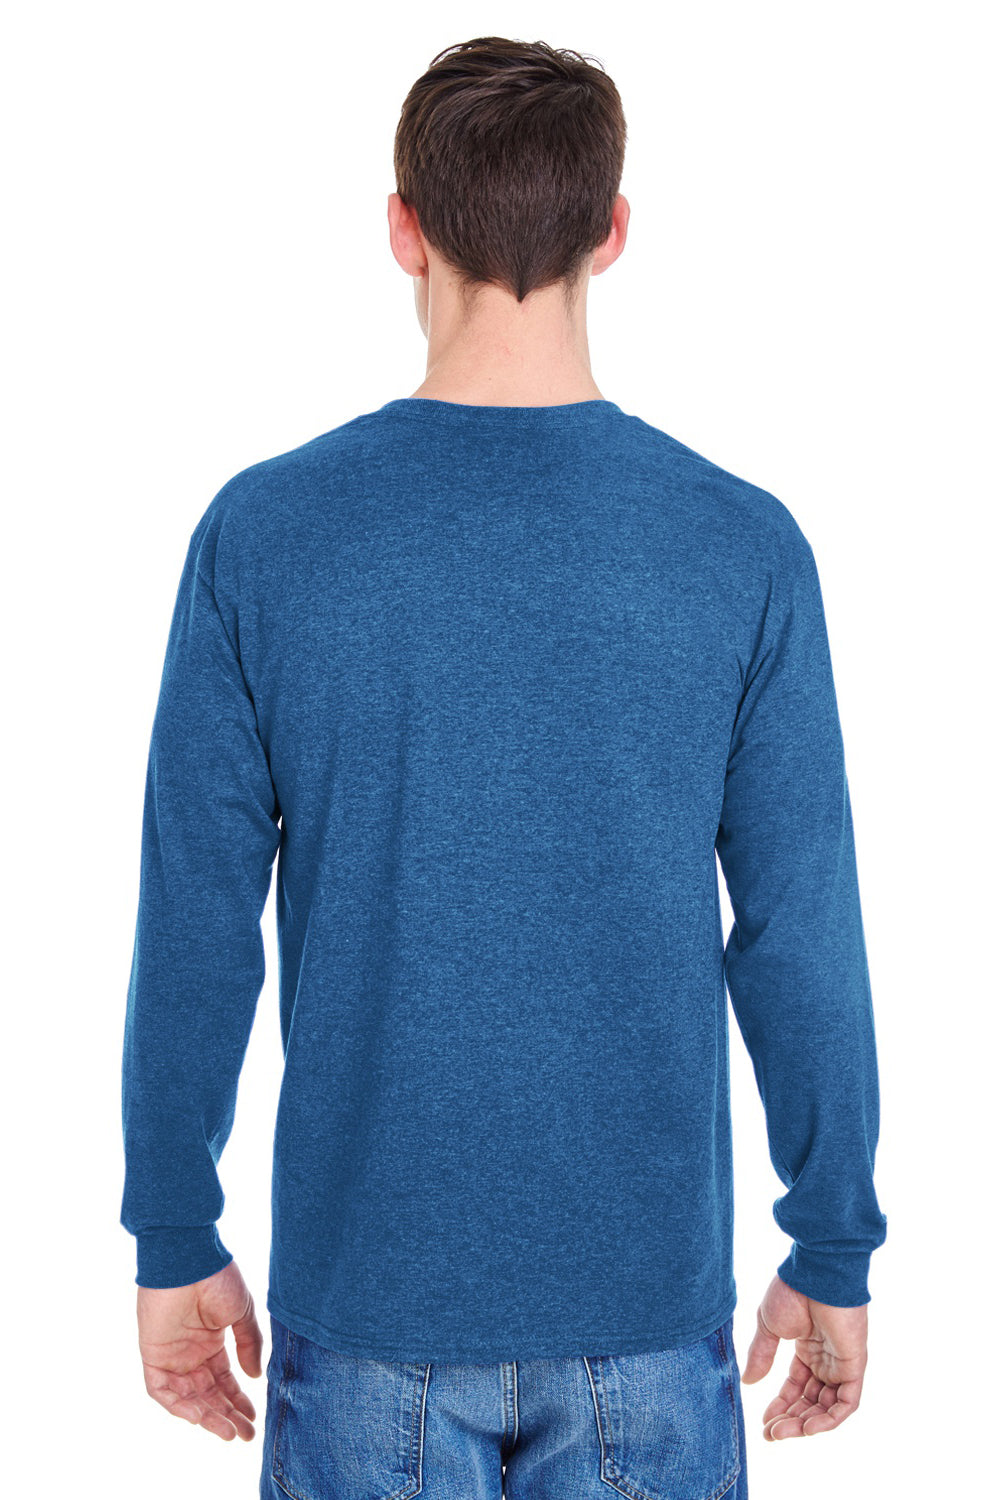 Fruit of the Loom 4930 HD Cotton Long-Sleeve T-Shirt